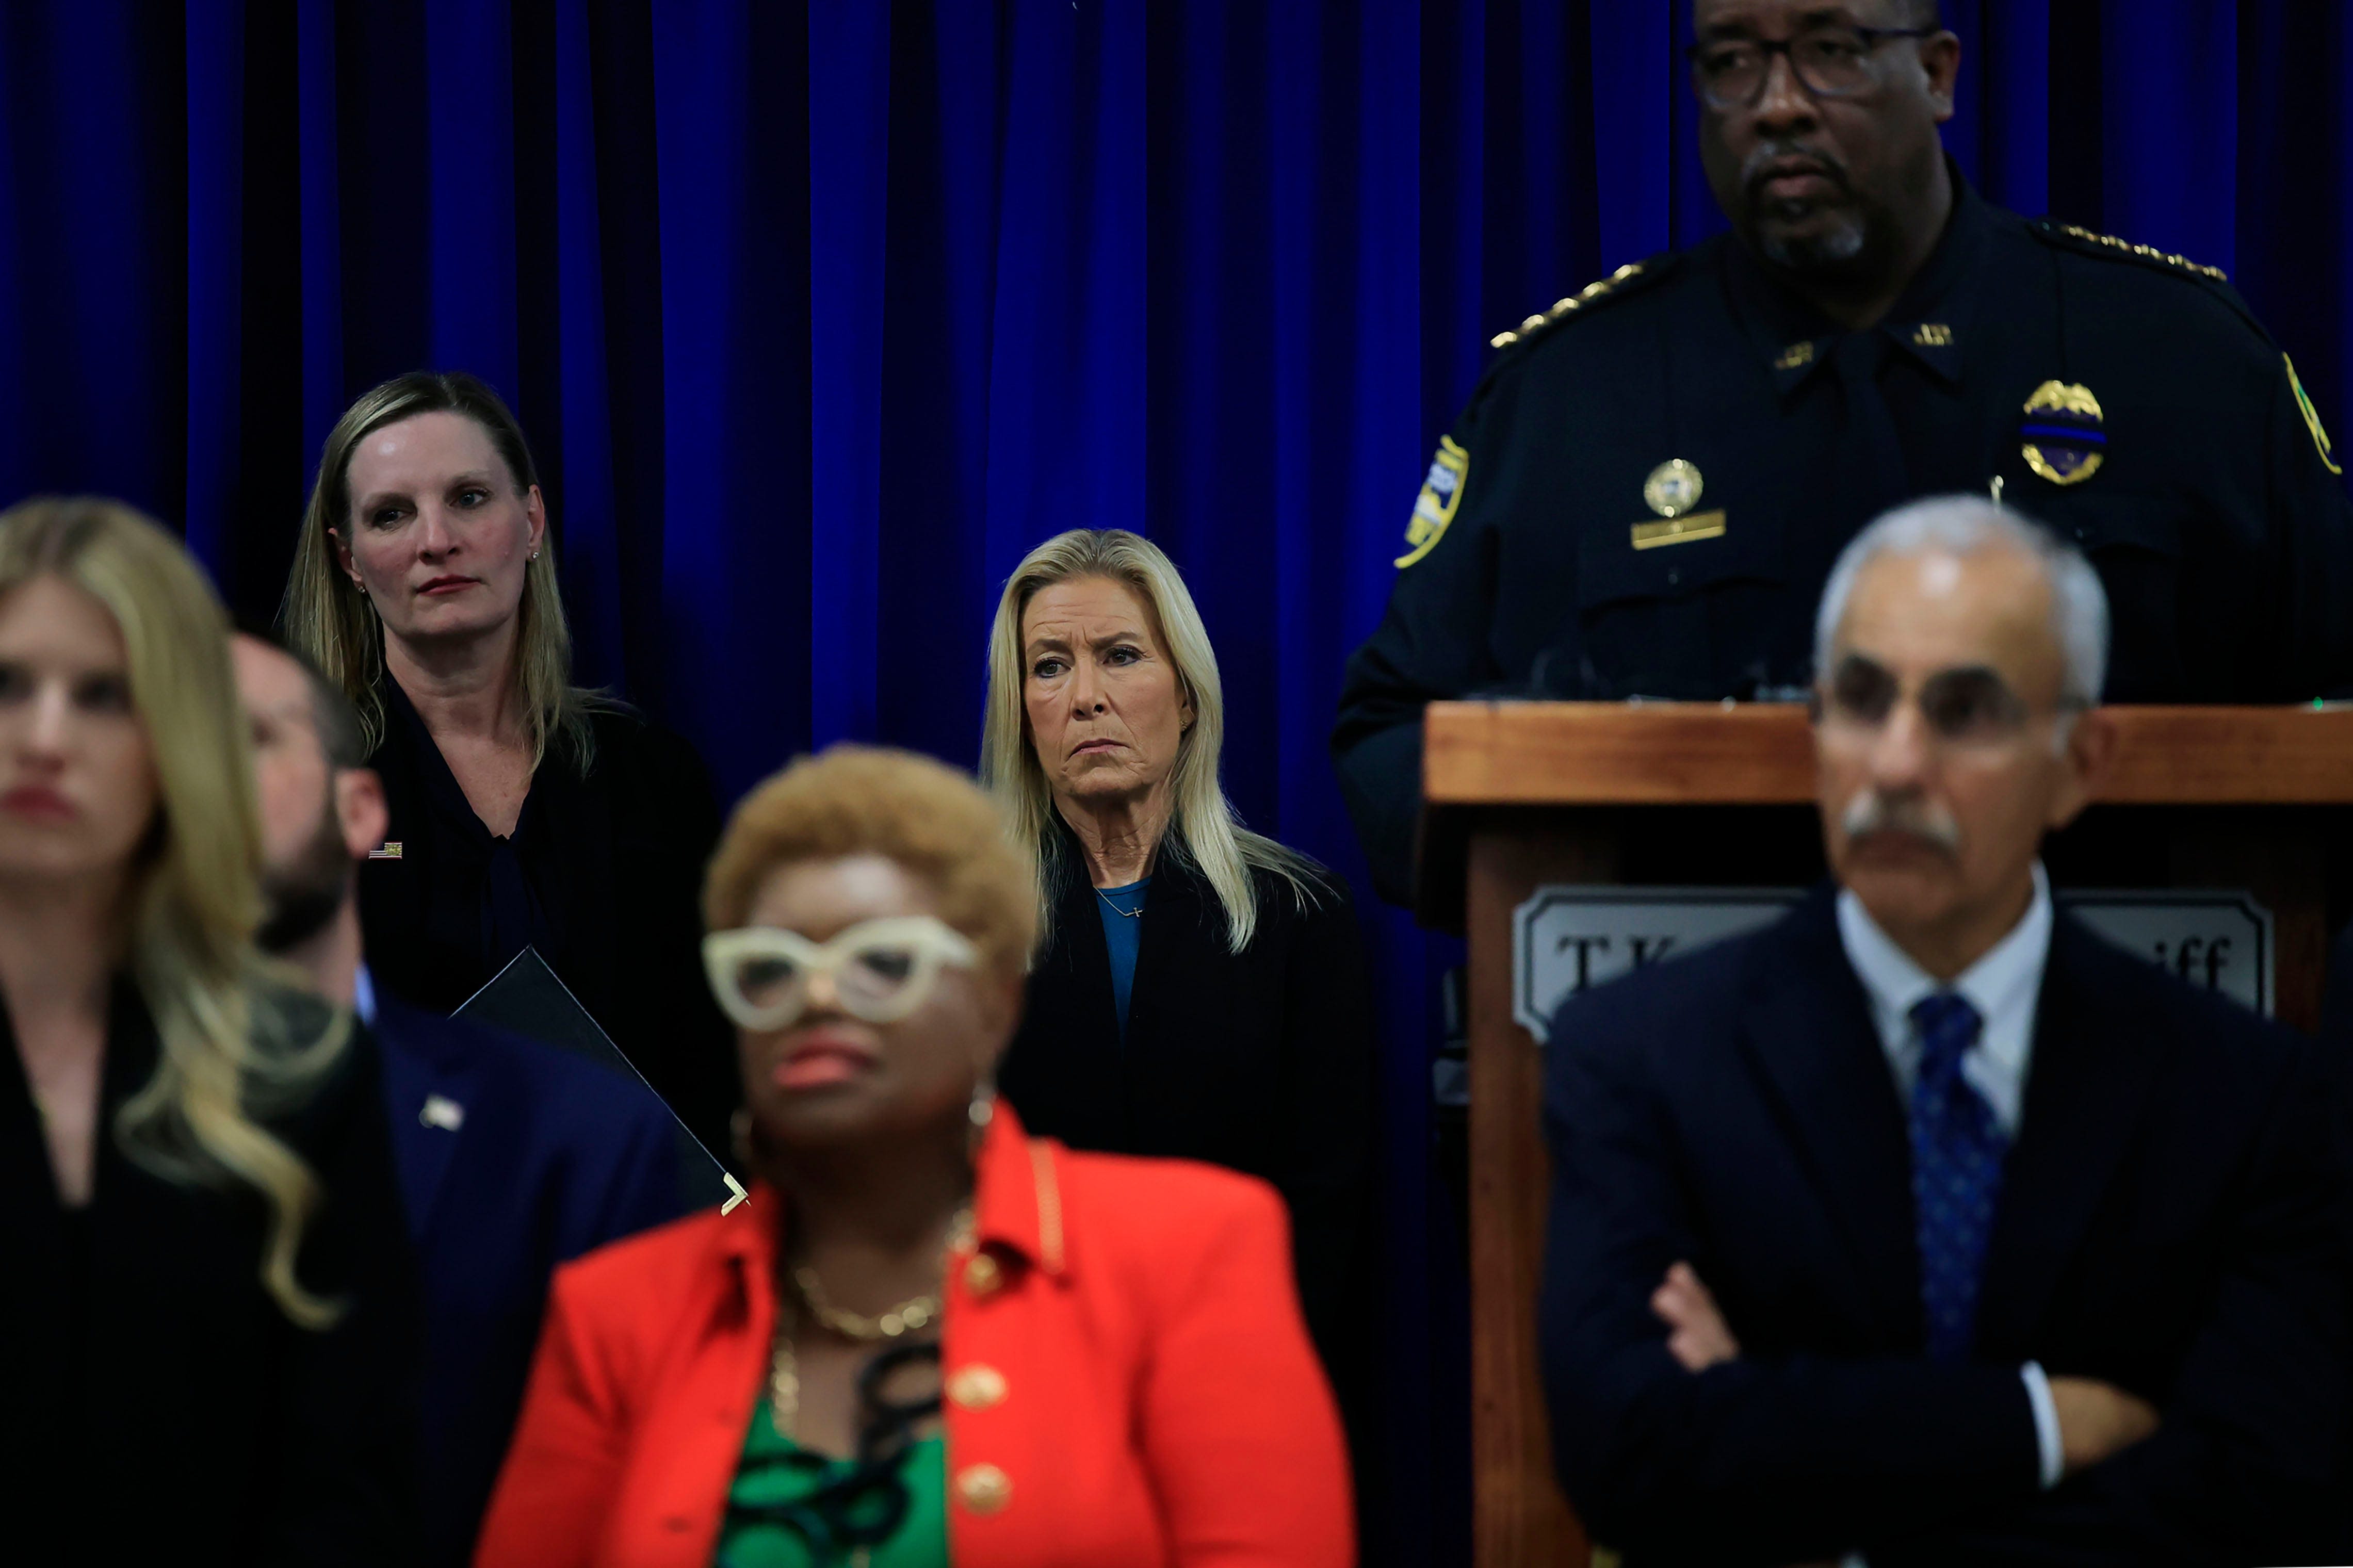 Sheriff makes pitch for 40 more police officers and mayor offers return of pensions